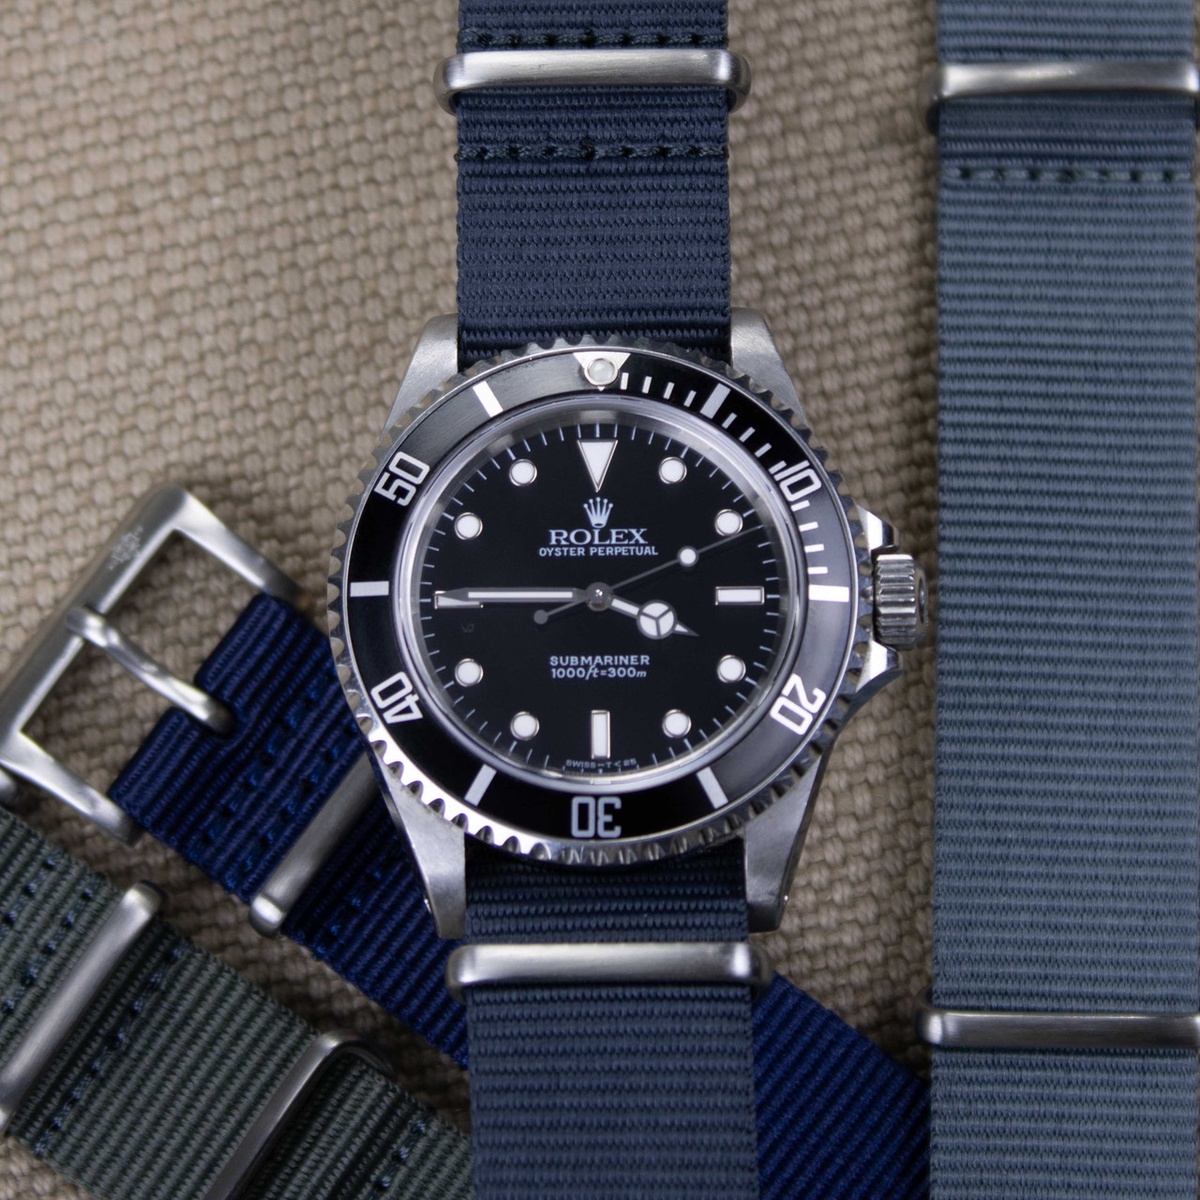 Top 5 Tips for Maintaining Your Watch Straps